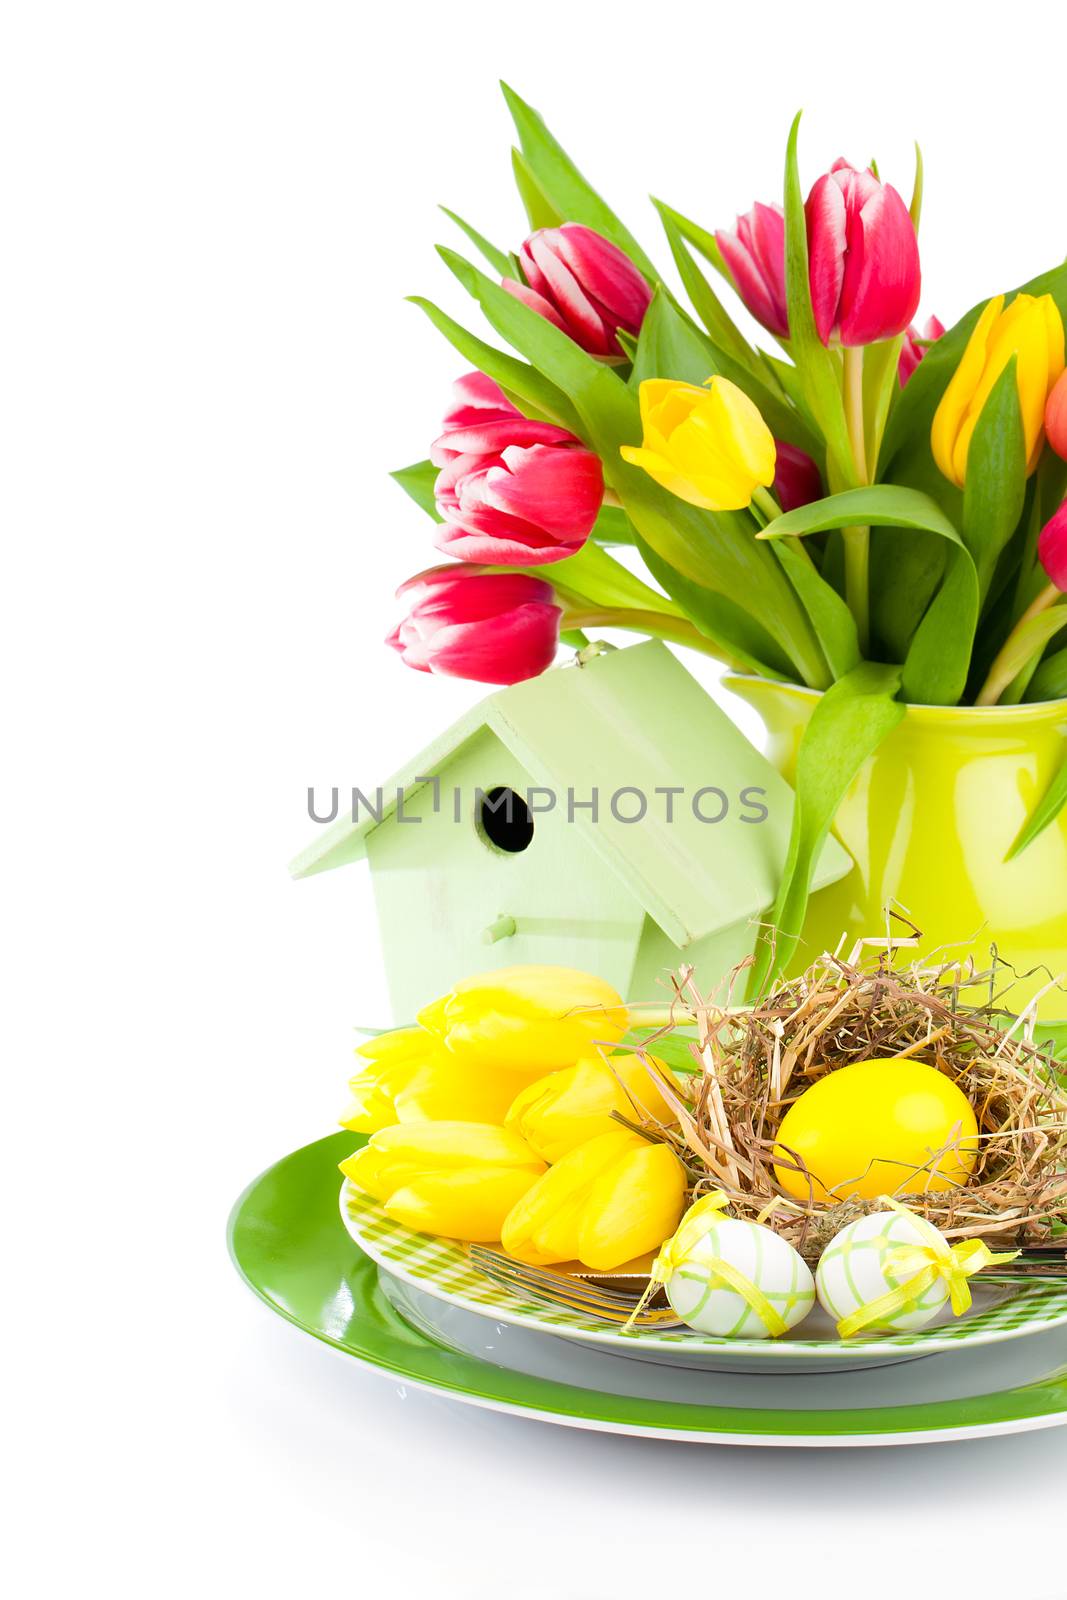 Easter eggs with tulips flowers and birdhouse, on a white backgr by motorolka